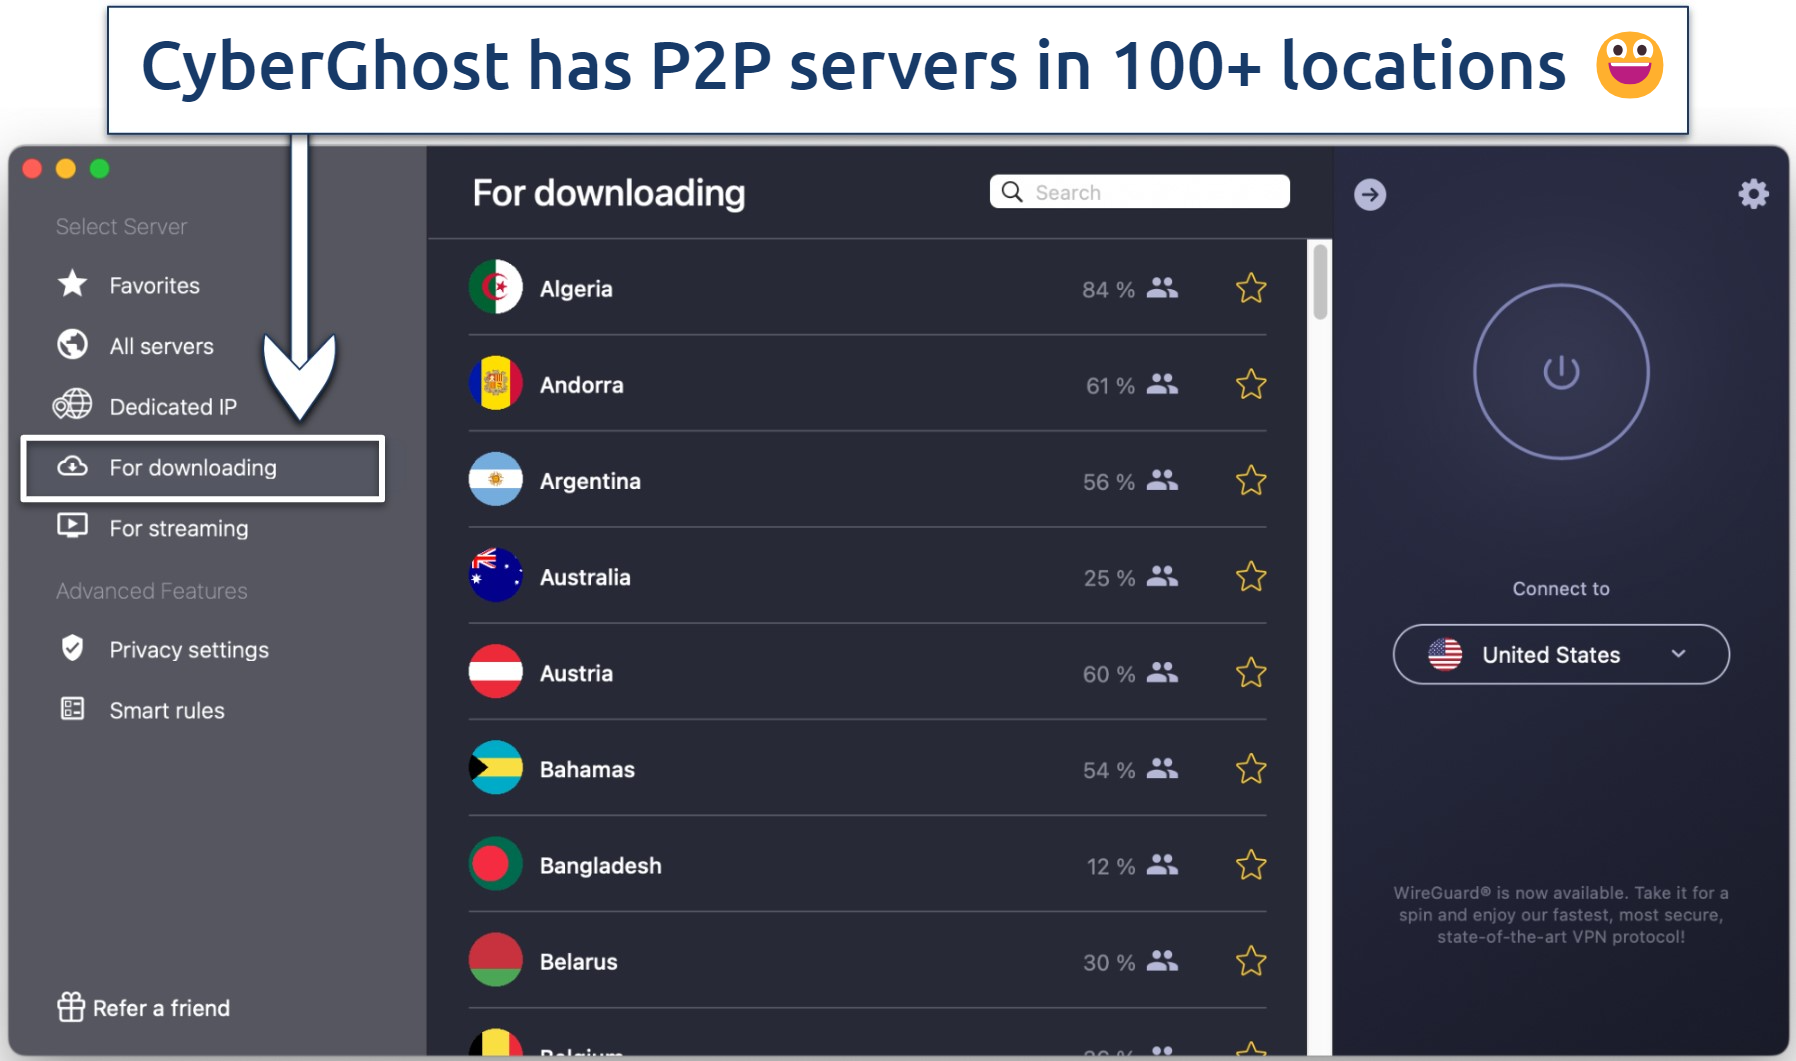 Screenshot showing CyberGhost's specialty P2P For downloading servers